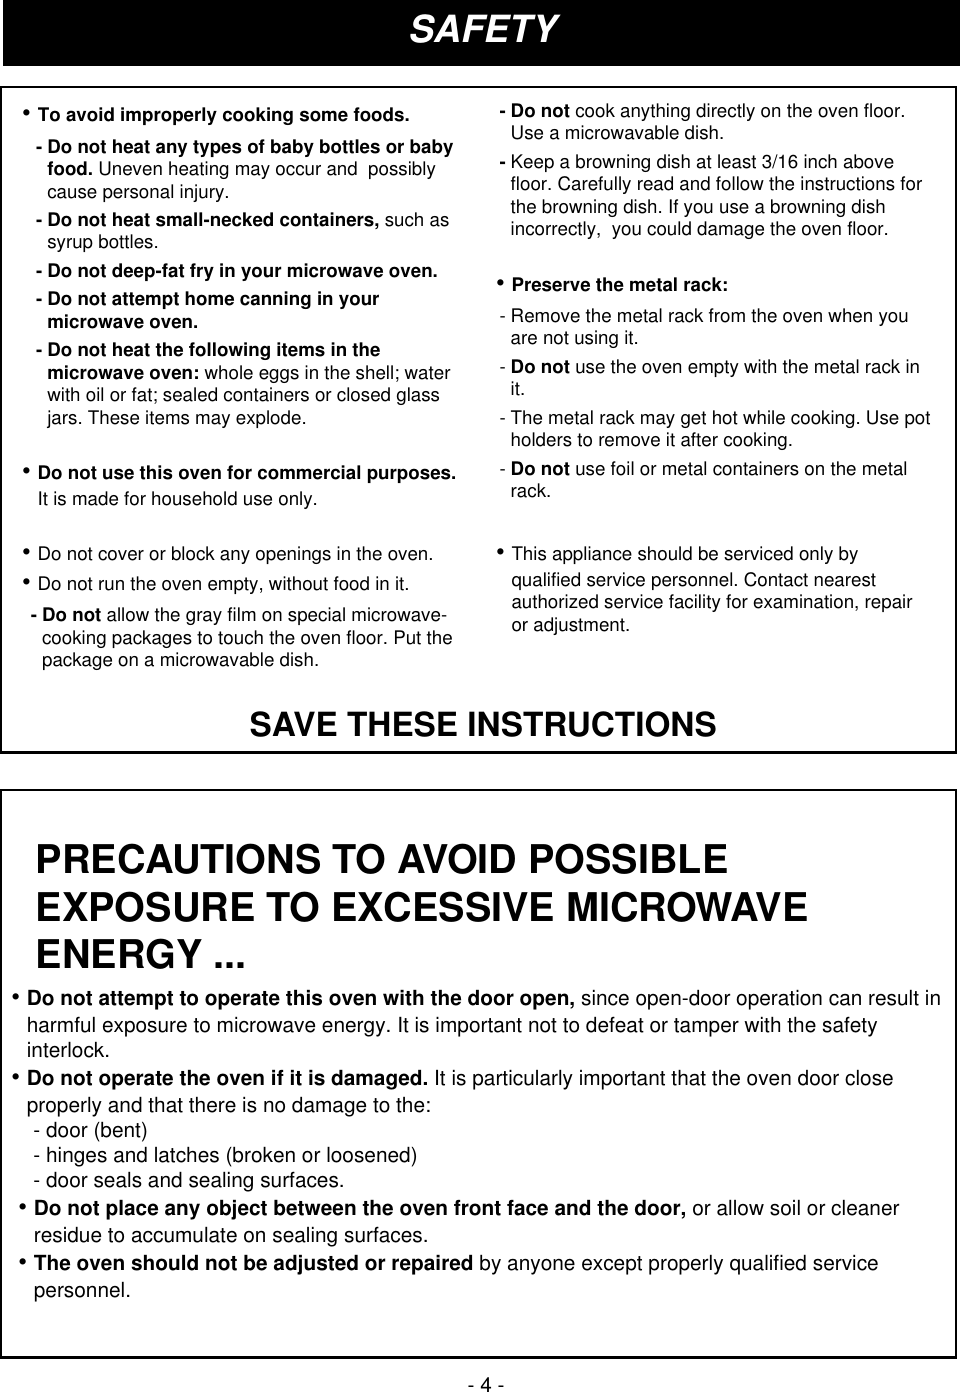 - 4 -SAFETYPRECAUTIONS TO AVOID POSSIBLEEXPOSURE TO EXCESSIVE MICROWAVEENERGY ...• Do not attempt to operate this oven with the door open, since open-door operation can result inharmful exposure to microwave energy. It is important not to defeat or tamper with the safetyinterlock.• Do not operate the oven if it is damaged. It is particularly important that the oven door closeproperly and that there is no damage to the:- door (bent)- hinges and latches (broken or loosened)- door seals and sealing surfaces.• Do not place any object between the oven front face and the door, or allow soil or cleanerresidue to accumulate on sealing surfaces.• The oven should not be adjusted or repaired by anyone except properly qualified servicepersonnel.SAVE THESE INSTRUCTIONS• To avoid improperly cooking some foods.- Do not heat any types of baby bottles or babyfood. Uneven heating may occur and  possiblycause personal injury.- Do not heat small-necked containers, such assyrup bottles.- Do not deep-fat fry in your microwave oven.- Do not attempt home canning in yourmicrowave oven.- Do not heat the following items in themicrowave oven: whole eggs in the shell; waterwith oil or fat; sealed containers or closed glassjars. These items may explode.• Do not use this oven for commercial purposes.It is made for household use only.• Do not cover or block any openings in the oven.• Do not run the oven empty, without food in it.- Do not allow the gray film on special microwave-cooking packages to touch the oven floor. Put thepackage on a microwavable dish.- Do not cook anything directly on the oven floor.Use a microwavable dish.- Keep a browning dish at least 3/16 inch abovefloor. Carefully read and follow the instructions forthe browning dish. If you use a browning dishincorrectly,  you could damage the oven floor.• Preserve the metal rack:- Remove the metal rack from the oven when youare not using it.- Do not use the oven empty with the metal rack init.- The metal rack may get hot while cooking. Use potholders to remove it after cooking.- Do not use foil or metal containers on the metalrack.• This appliance should be serviced only byqualified service personnel. Contact nearestauthorized service facility for examination, repairor adjustment.